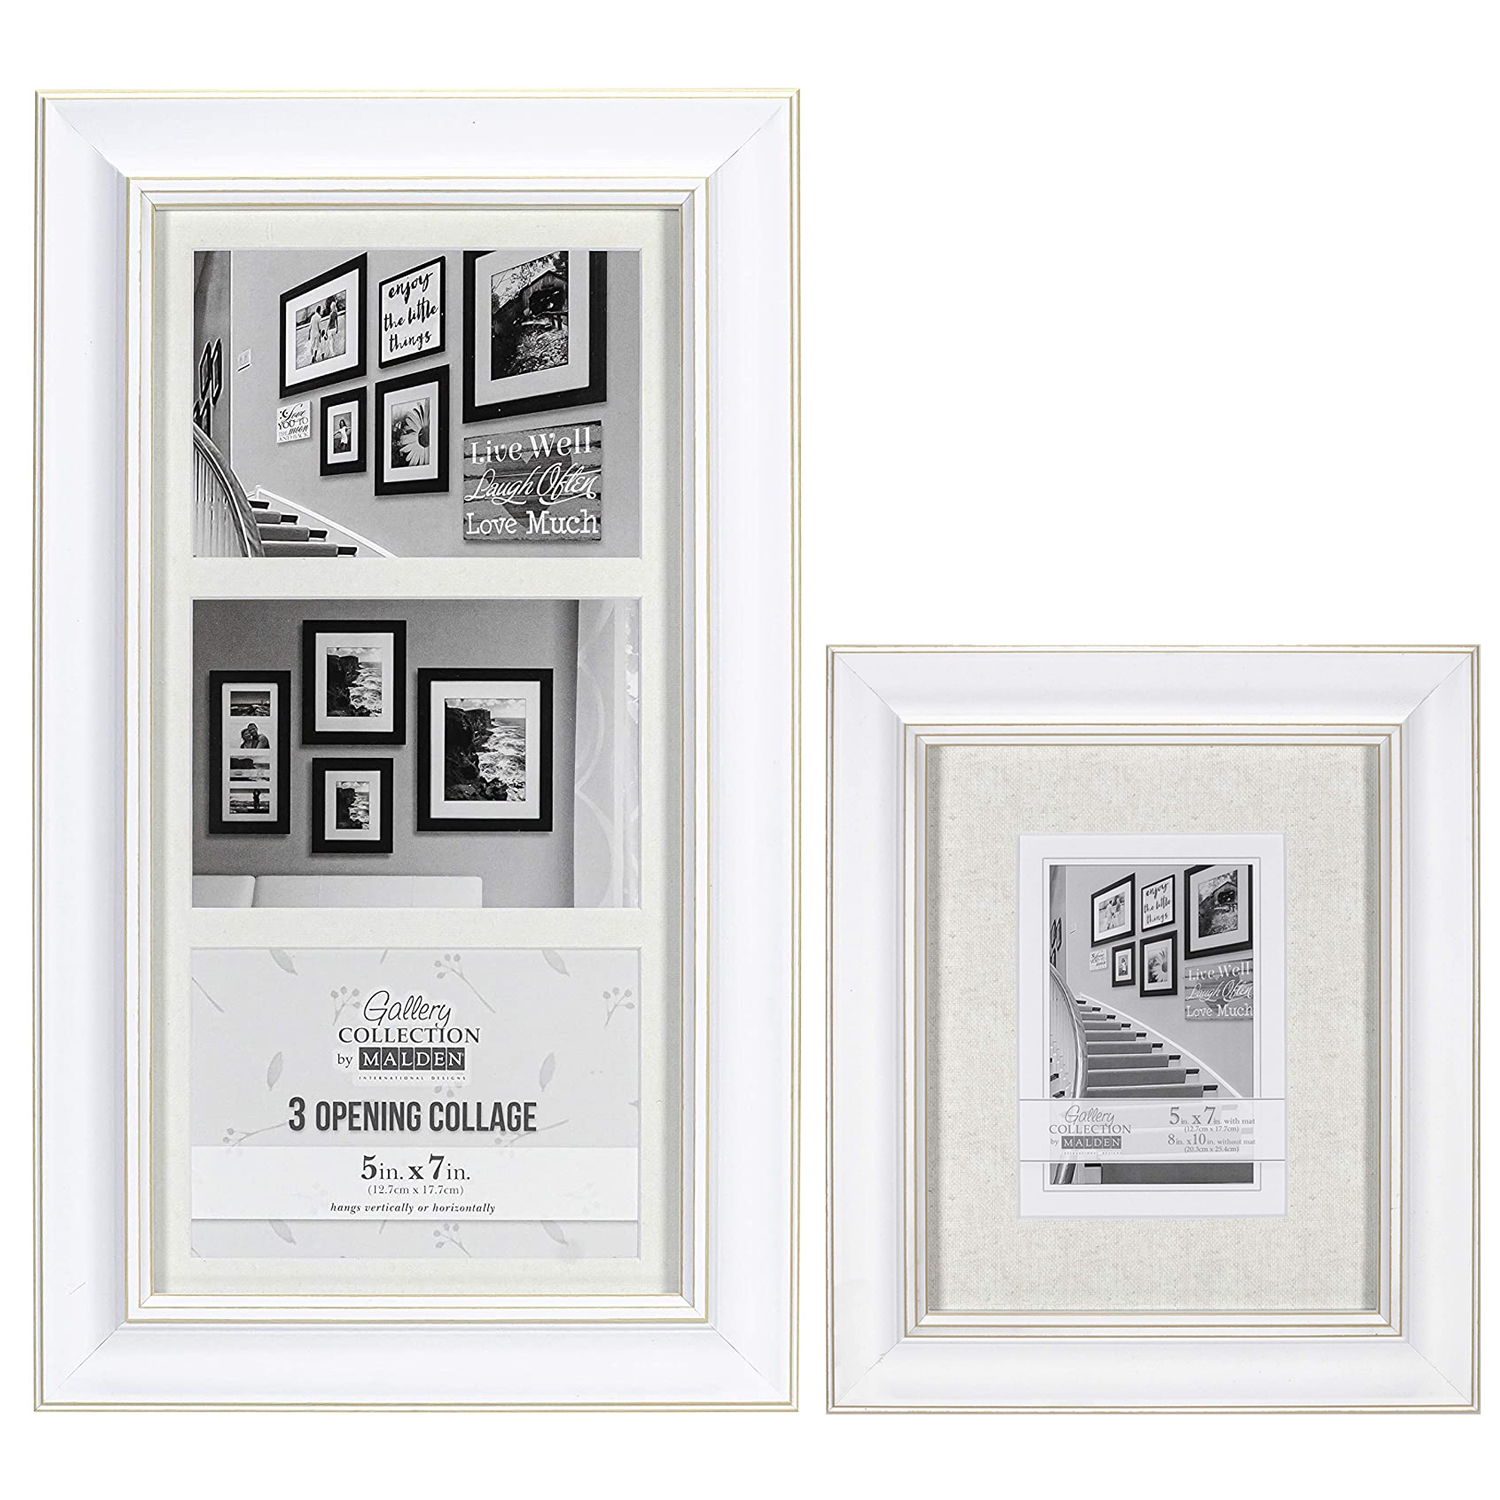 Malden International Designs 8x10 Matted To 5x7 White Picture Frame